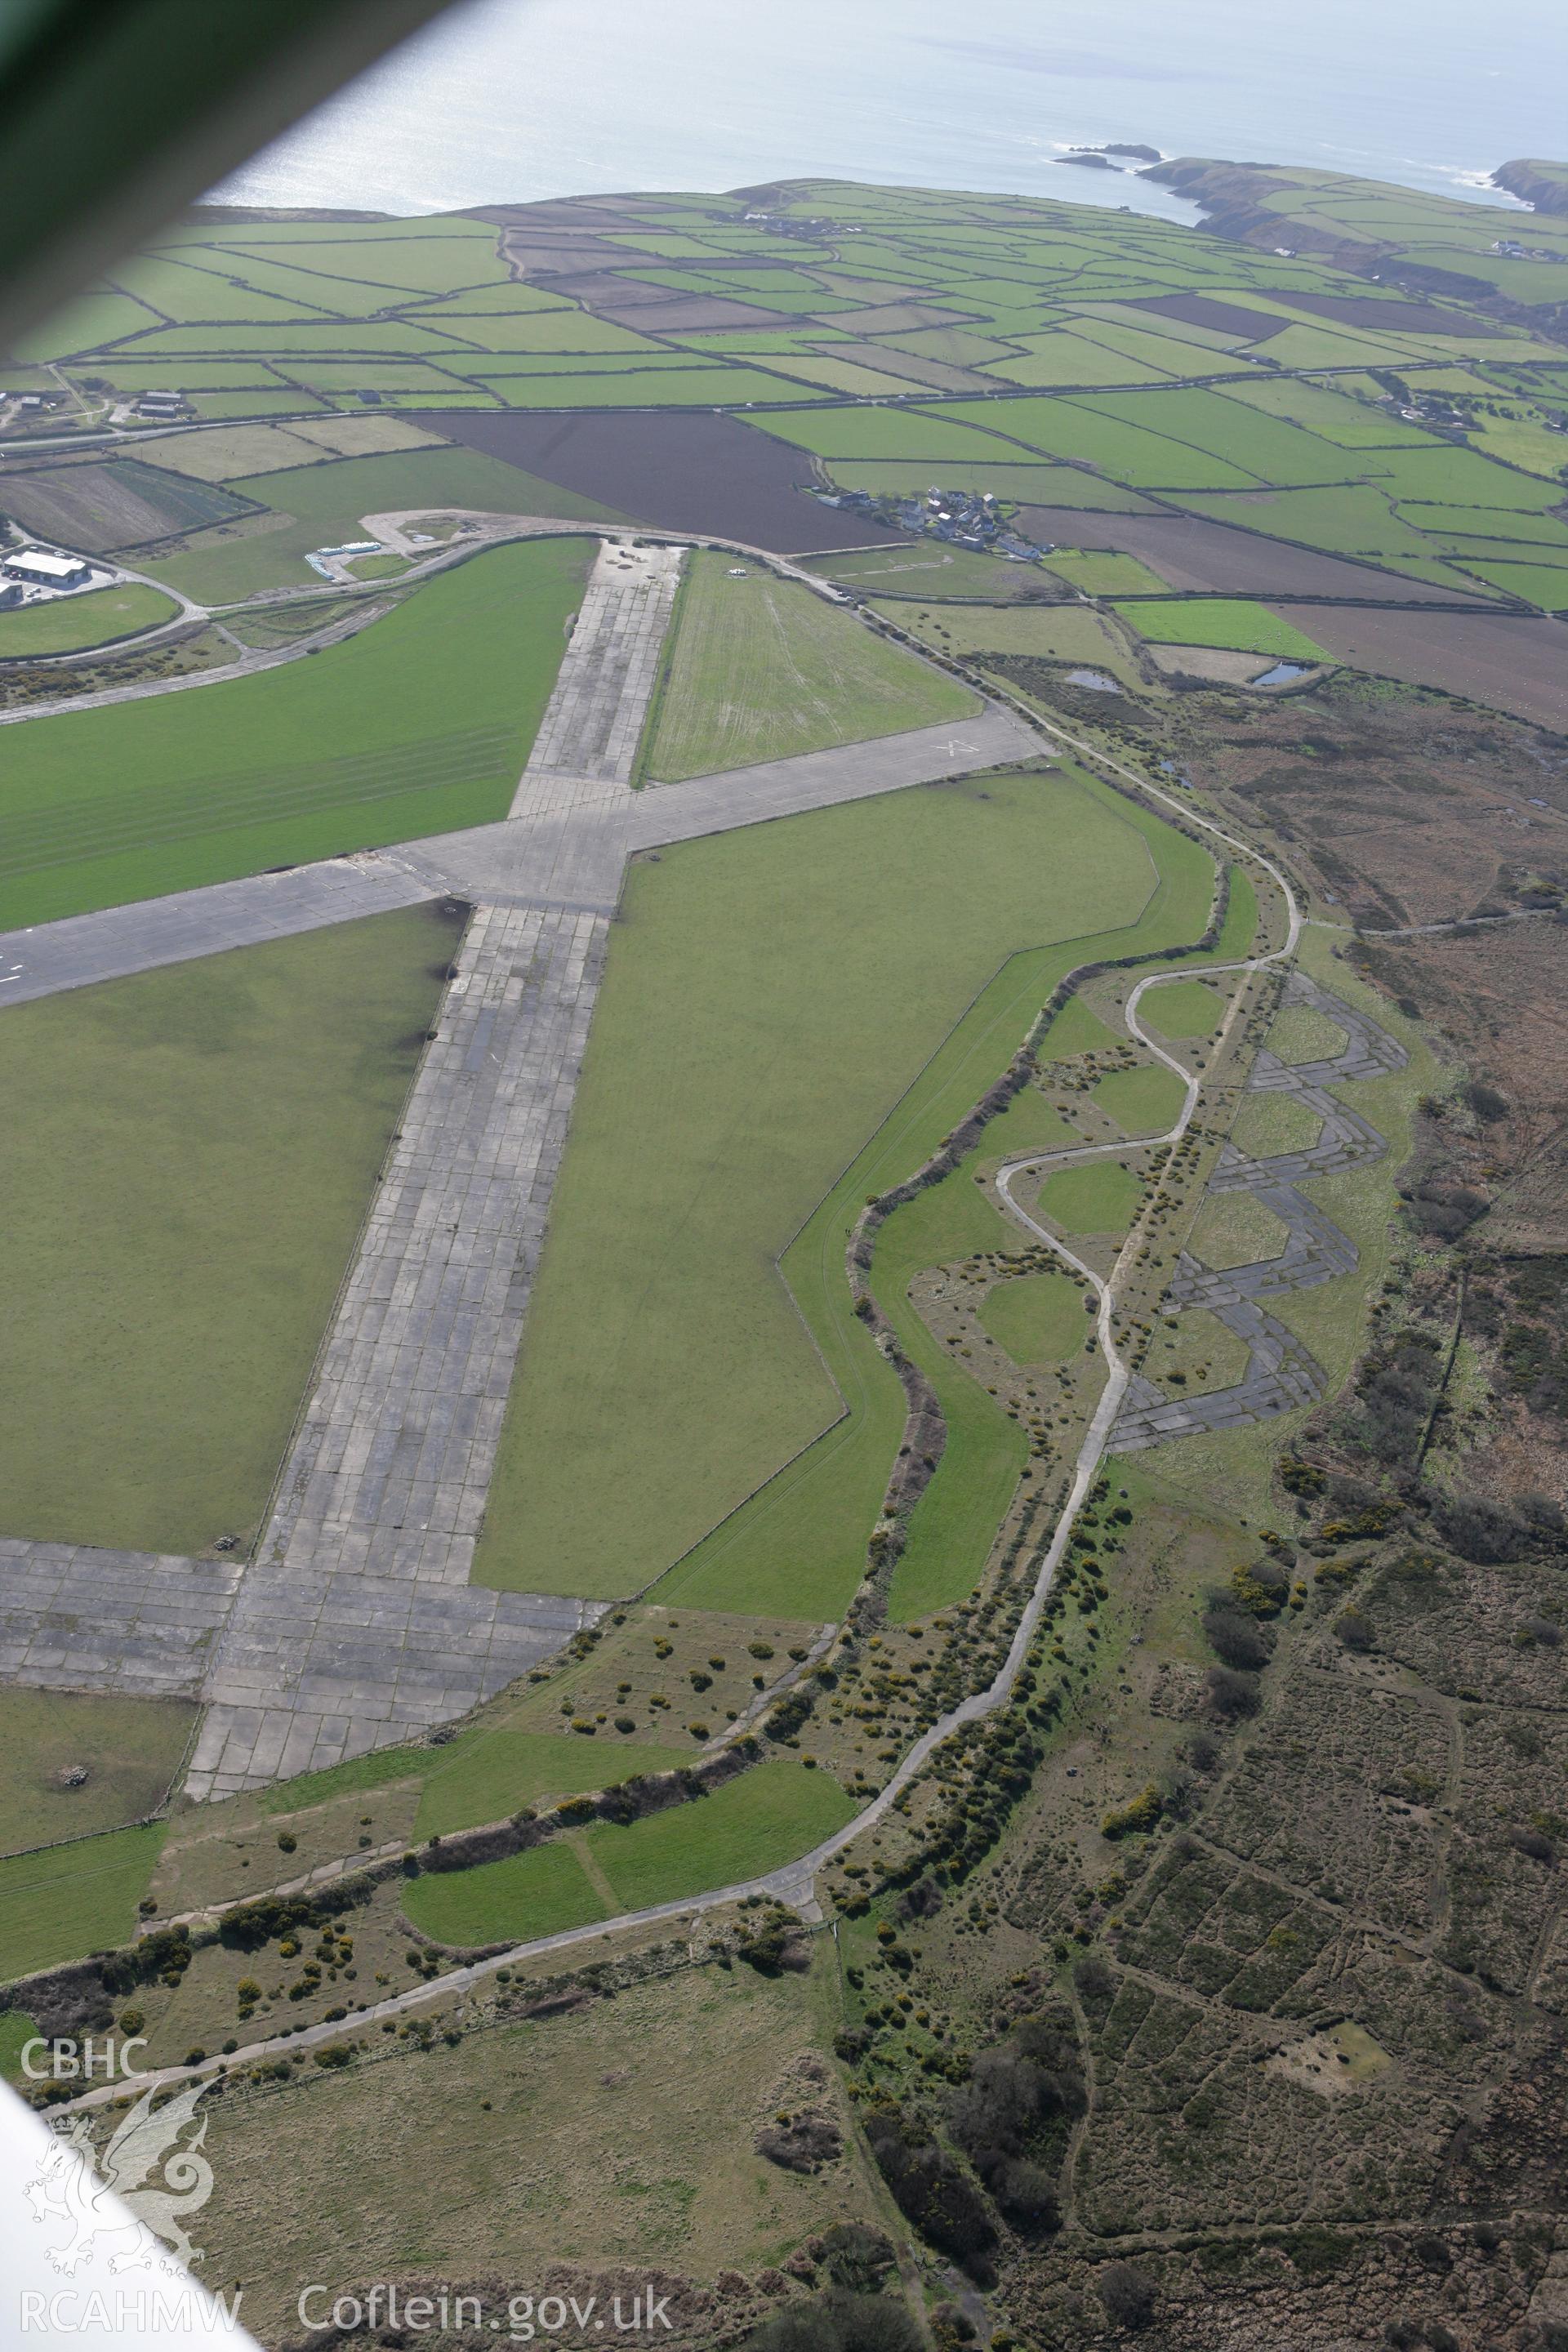 RCAHMW colour oblique photograph of St David's Airfield, Solva. Taken by Toby Driver on 04/03/2008.